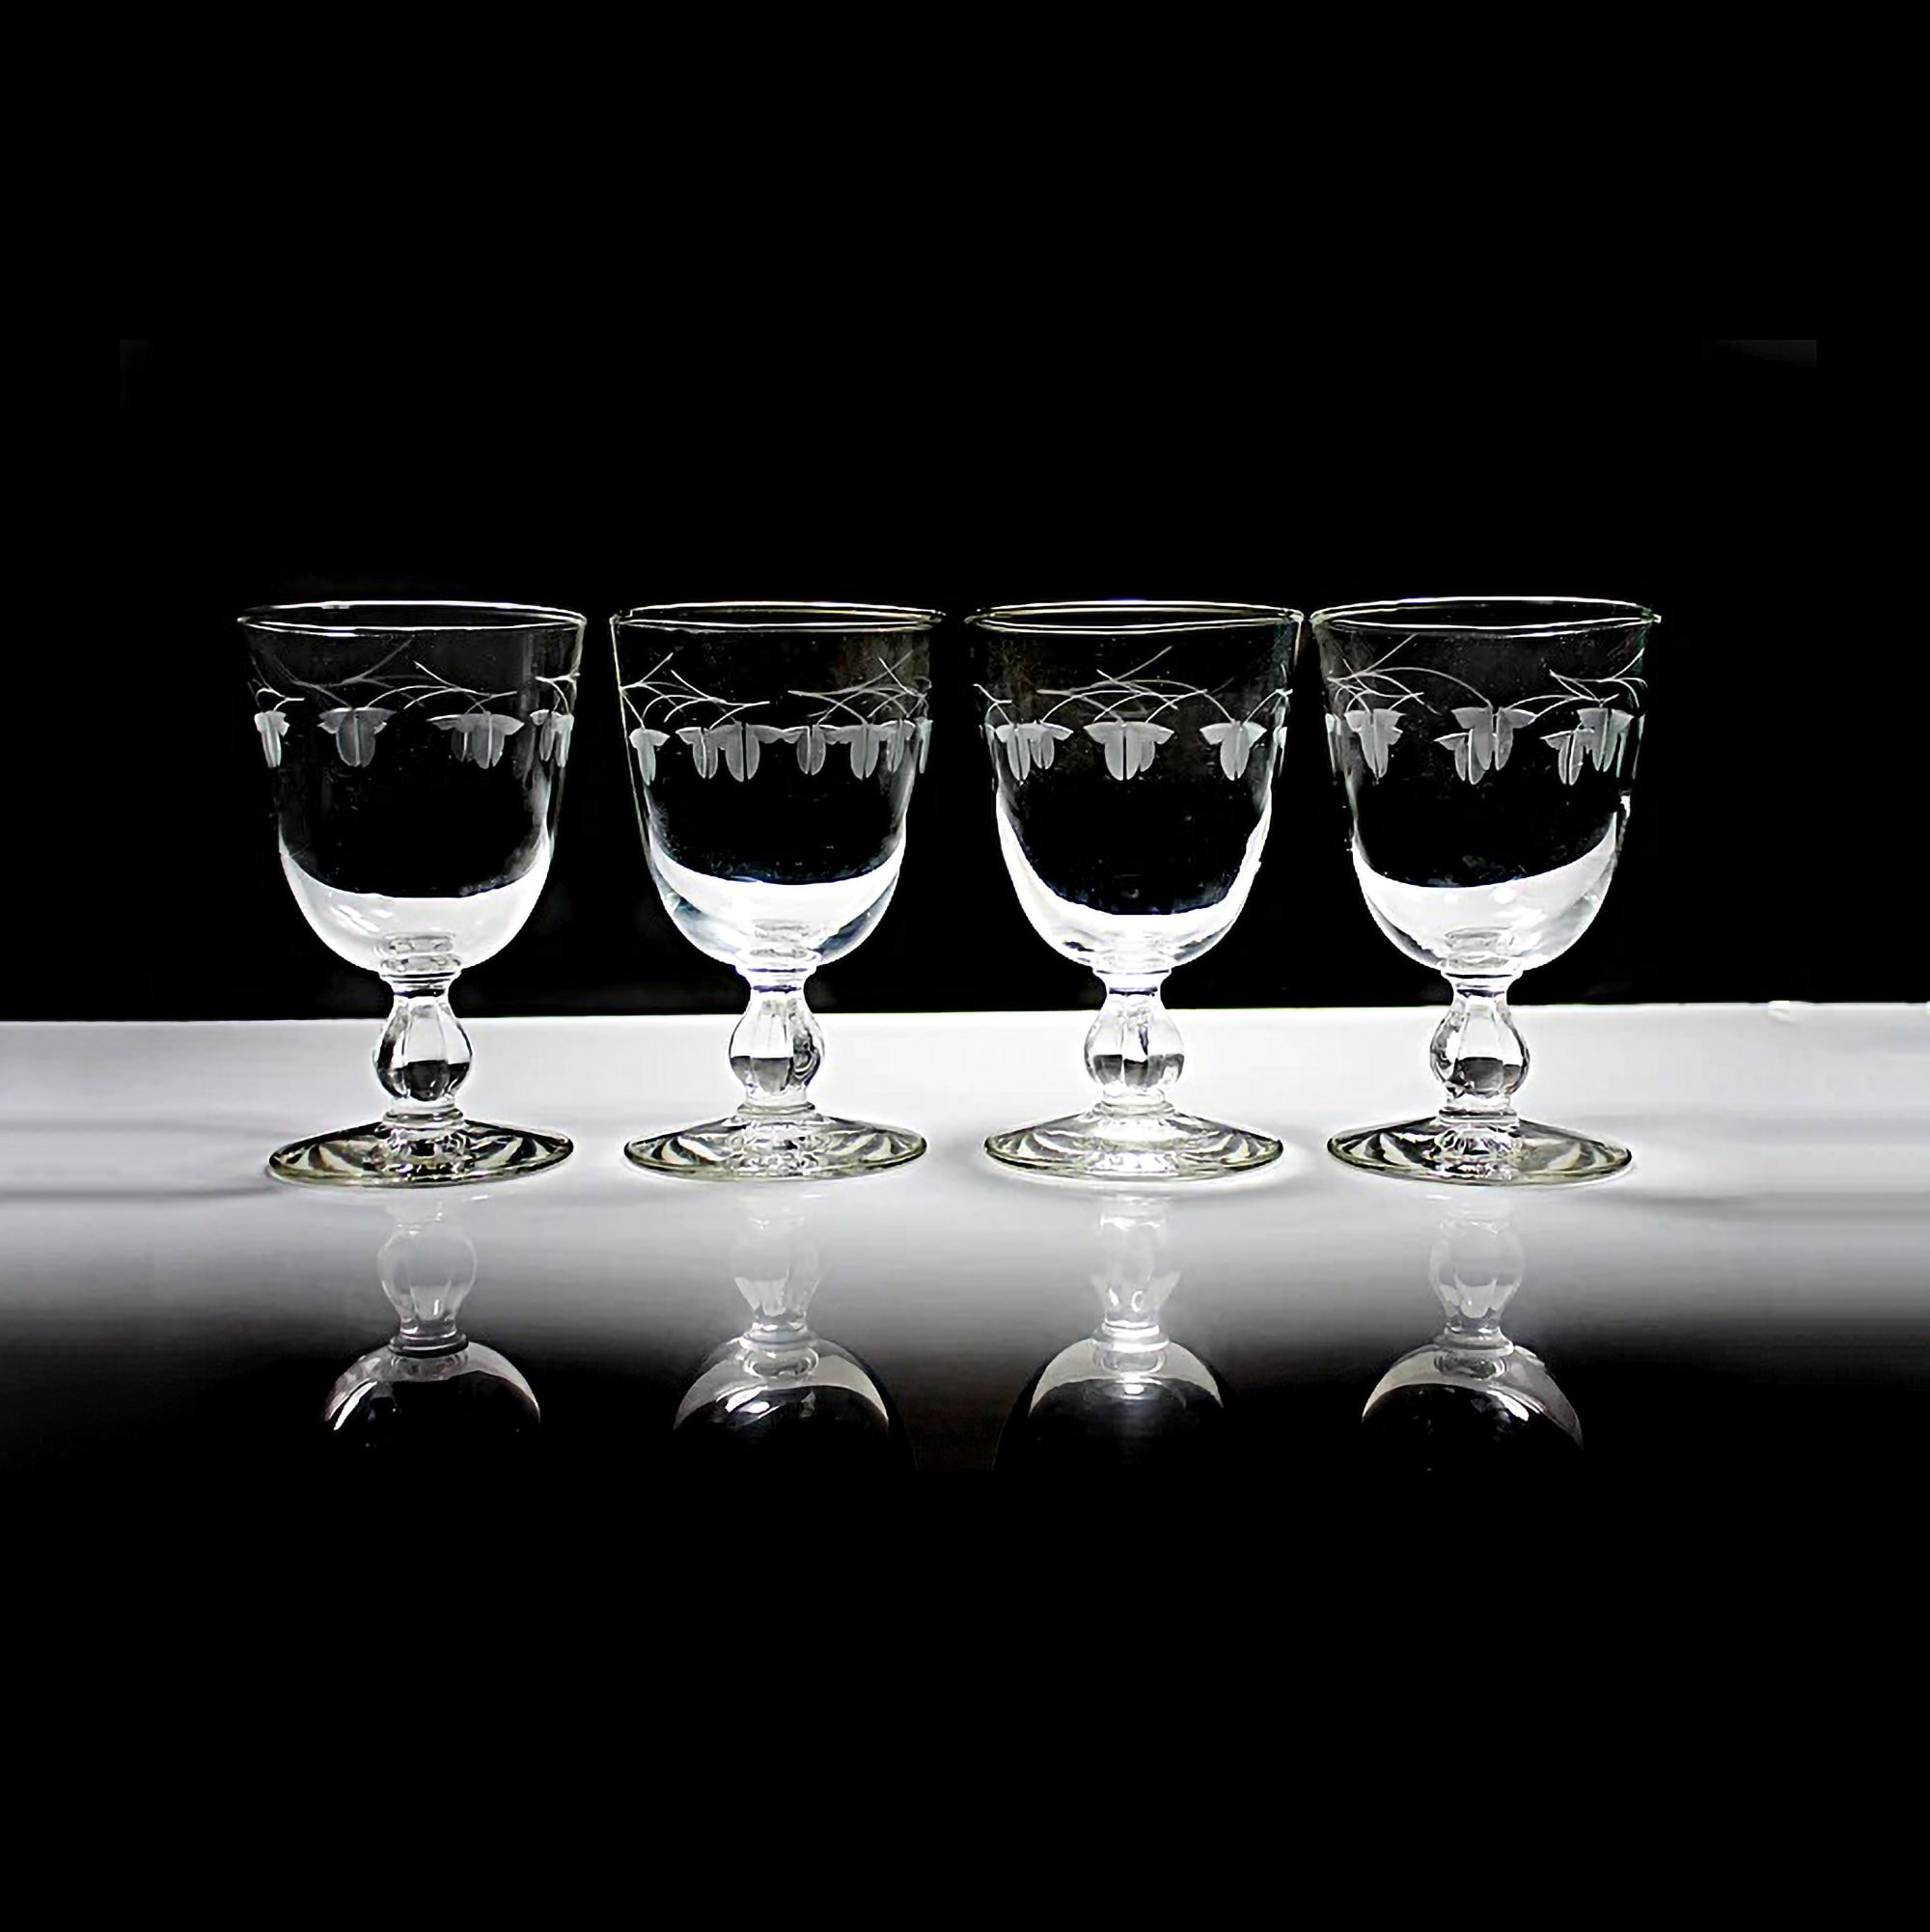 5 Vintage Etched Tall Wine Glasses ~ Water Goblets, 1950's Etched